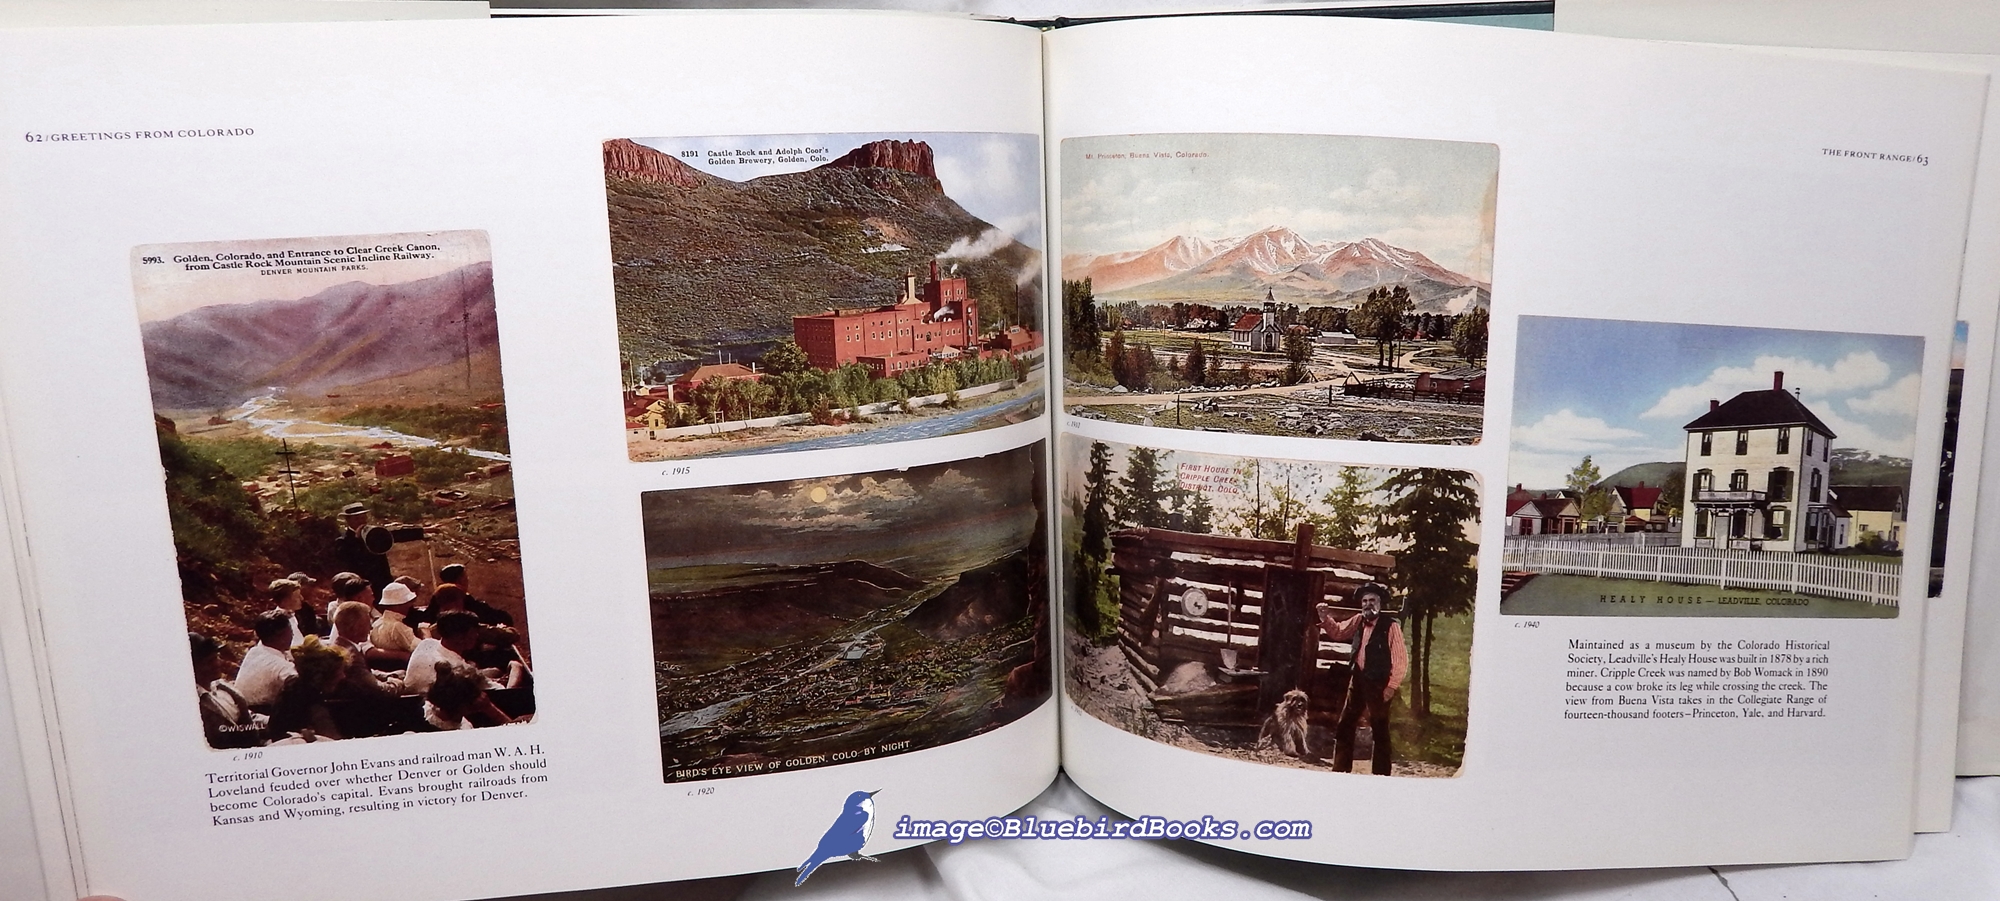 SPRAGUE, MARSHALL - Greetings from Colorado: A Glimpse of the Past Through Postcards